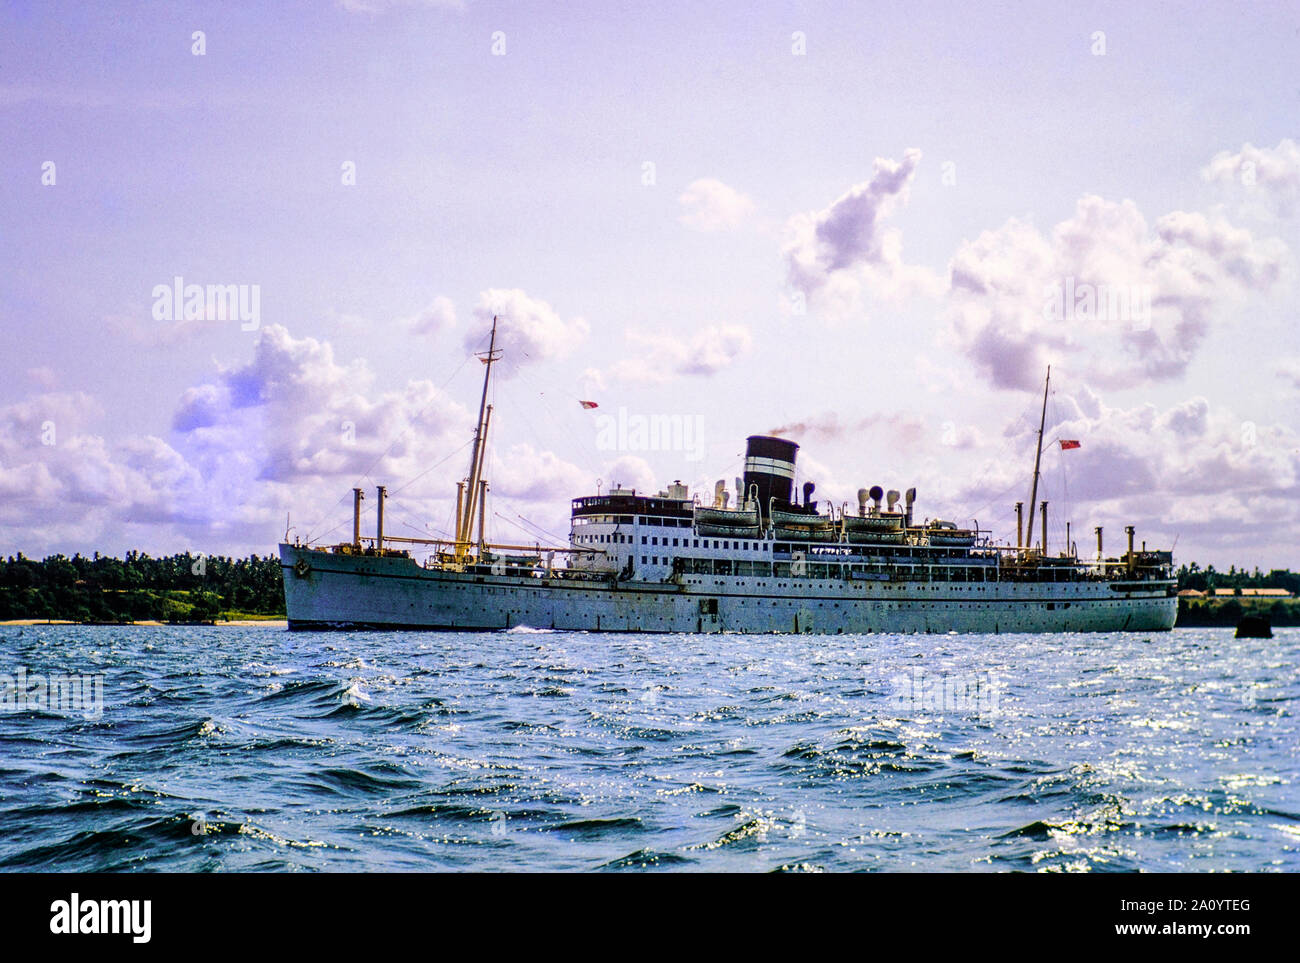 The former WW11 hospital ship HMS AMRA sailing into the Port of Aden in the Yemen in 1960. She was originally built for the British India Steam Navigation Company Ltd of Calcutta in November 1938, for use on its Calcutta-Rangoon service. She was requisitioned by the British Government as a troop carrier and hospital ship for the duration of the war. Following the war she was used by the Indian government for the transportation of freight and passengers on the East African route, before eventually being broken up in 1961. Stock Photo